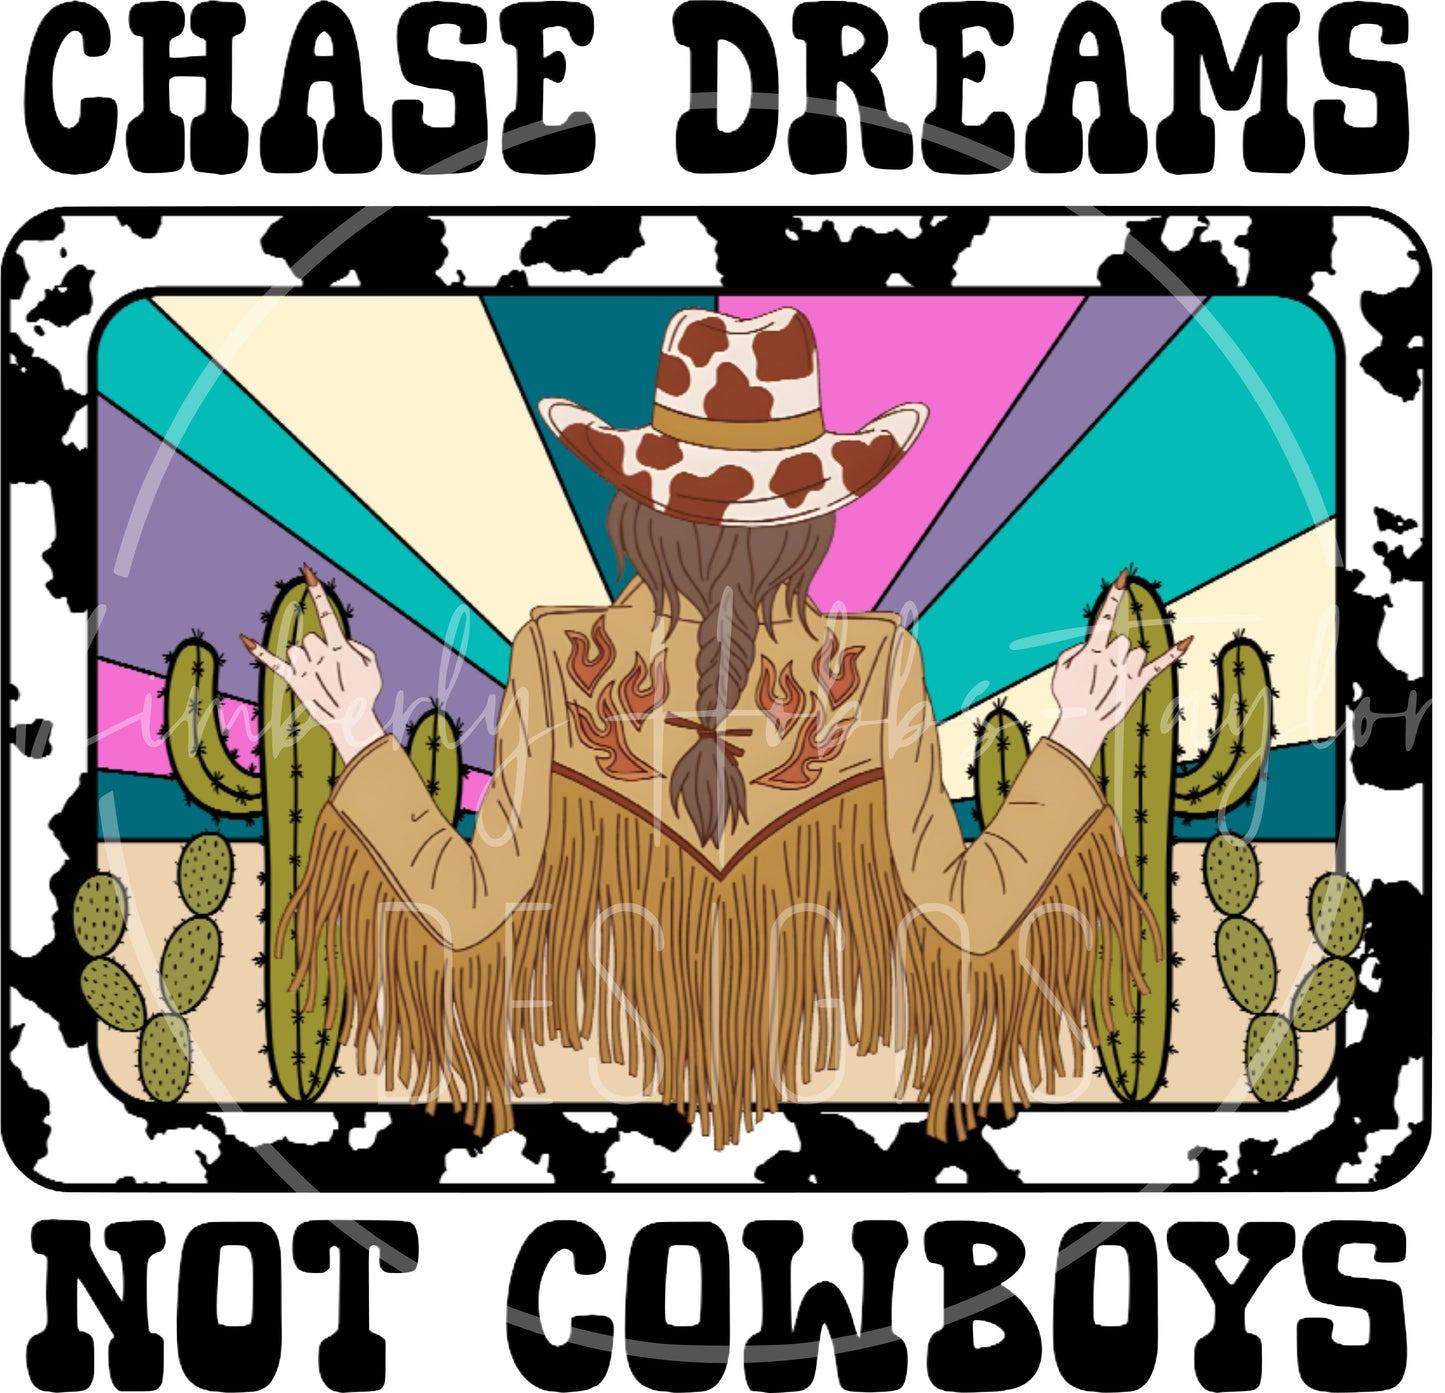 Chase Dreams Not Cowboys decal